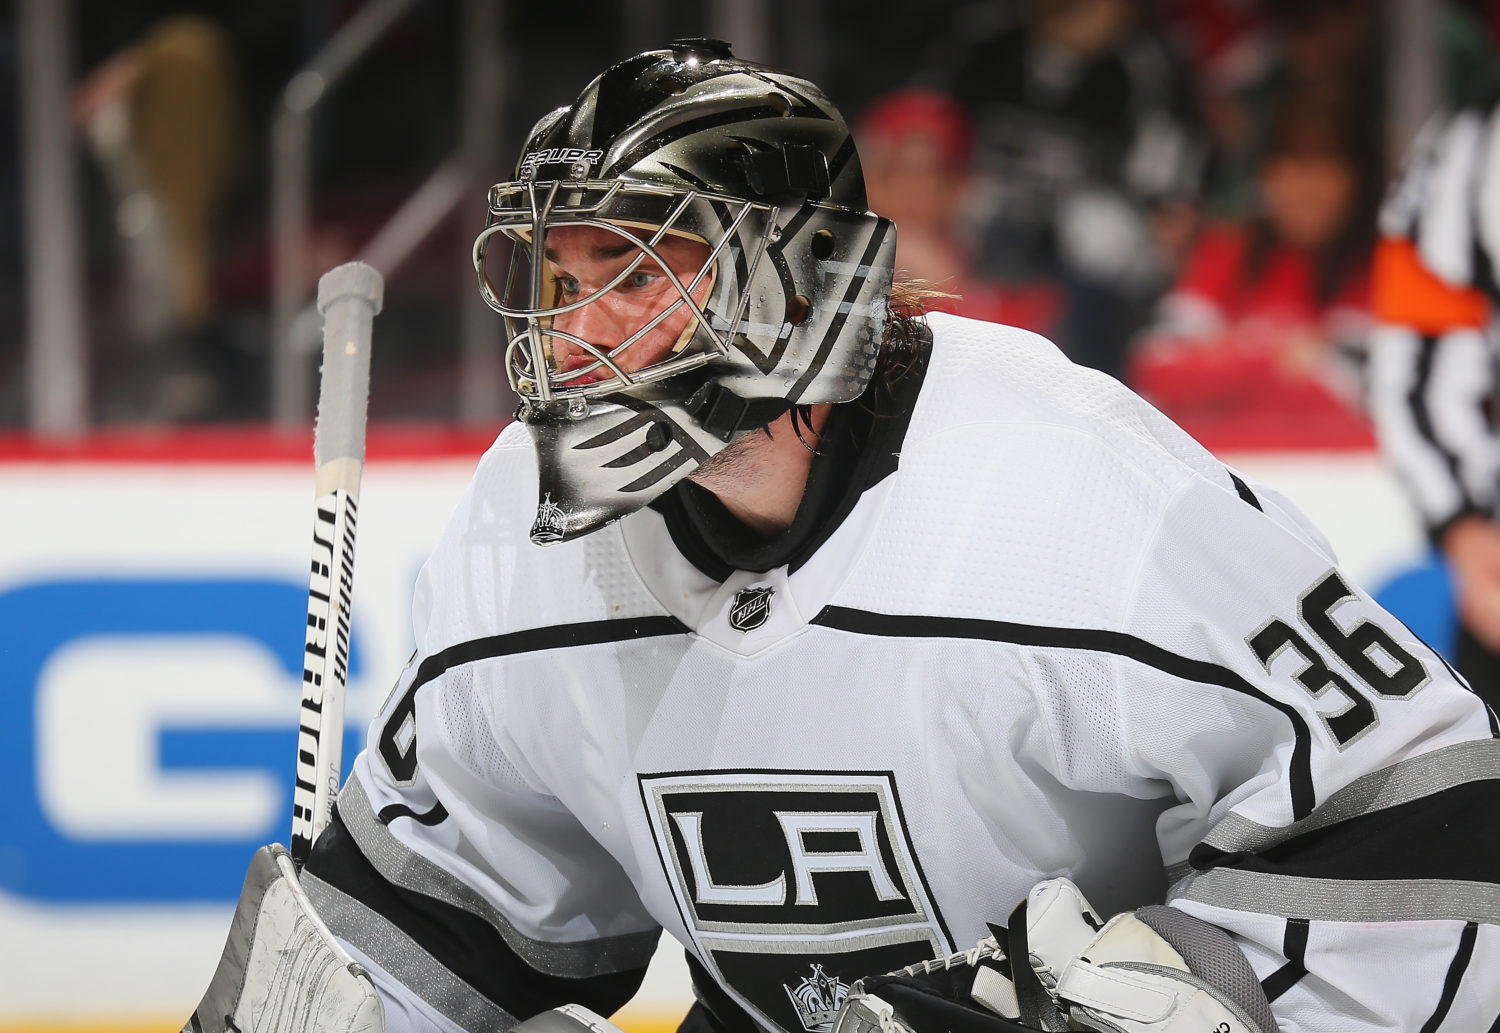 What Went Wrong For LA Kings G Prospect Jack Campbell Since 2010 NHL Draft?